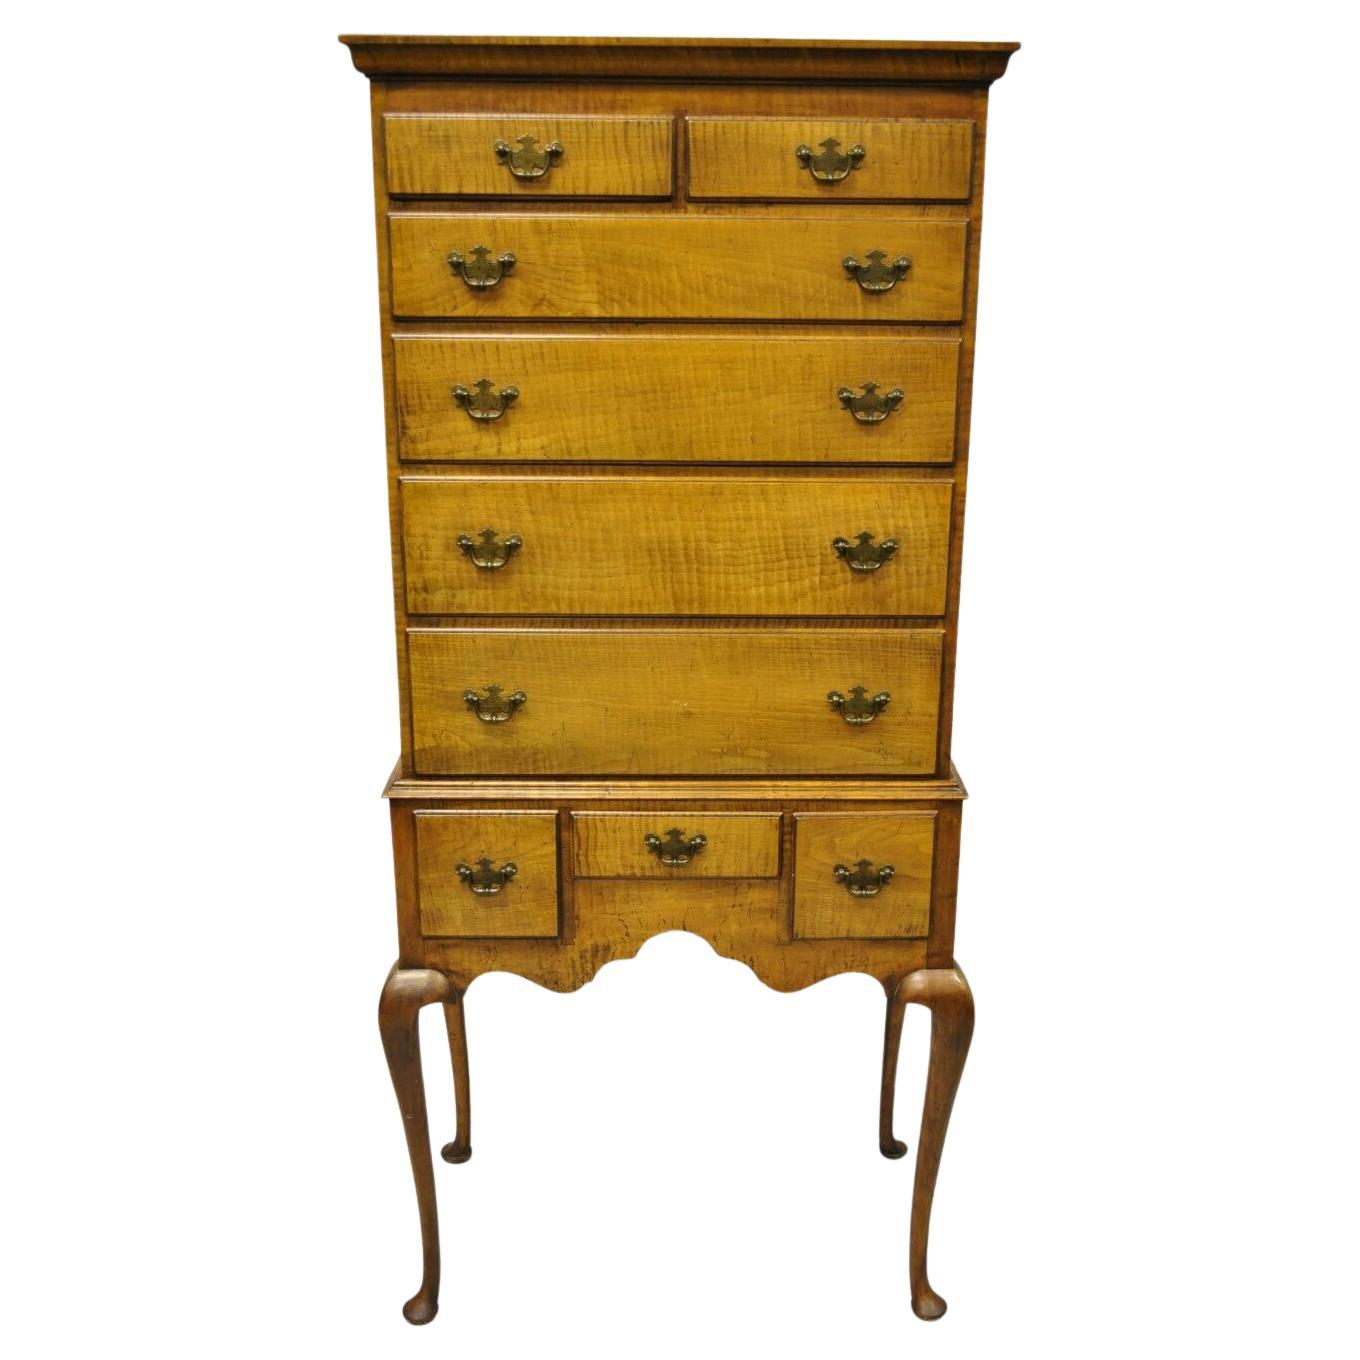 Antique New England Queen Anne Curly Tiger Maple Small Chest Dresser Highboy